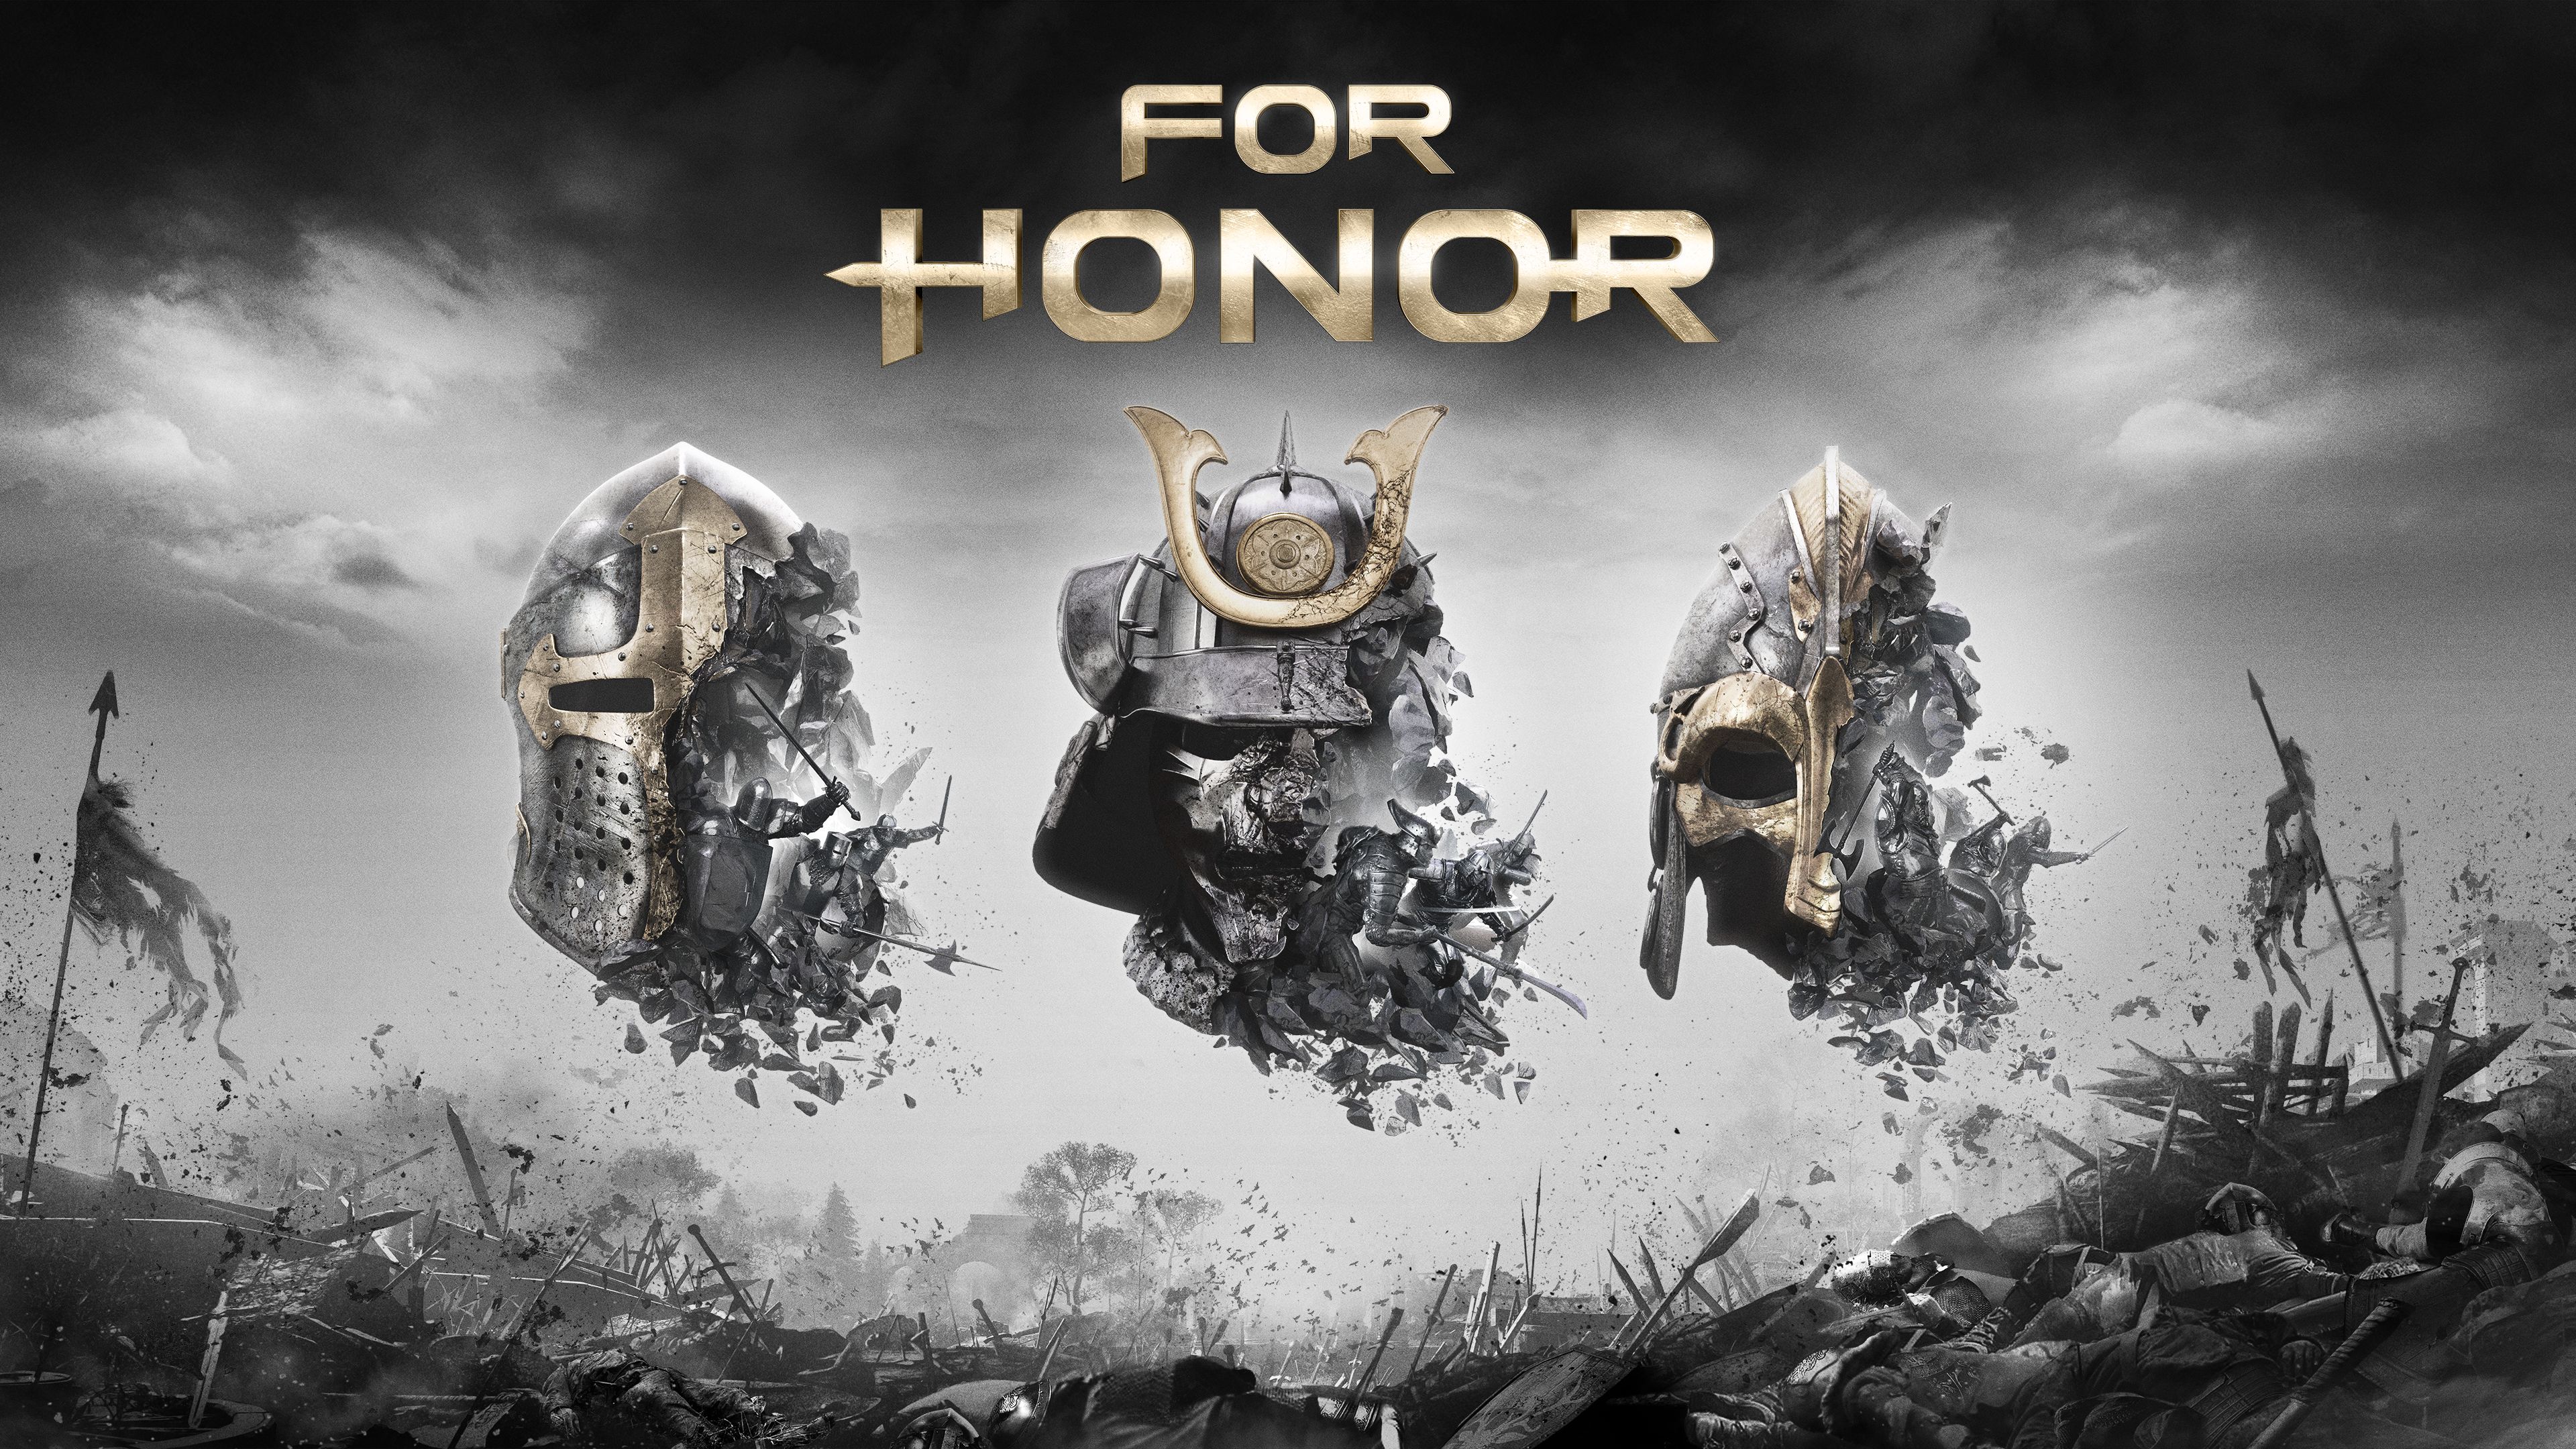 For_Honor_art_Iconic_Image_E3_150415_4pmPST_1434397229